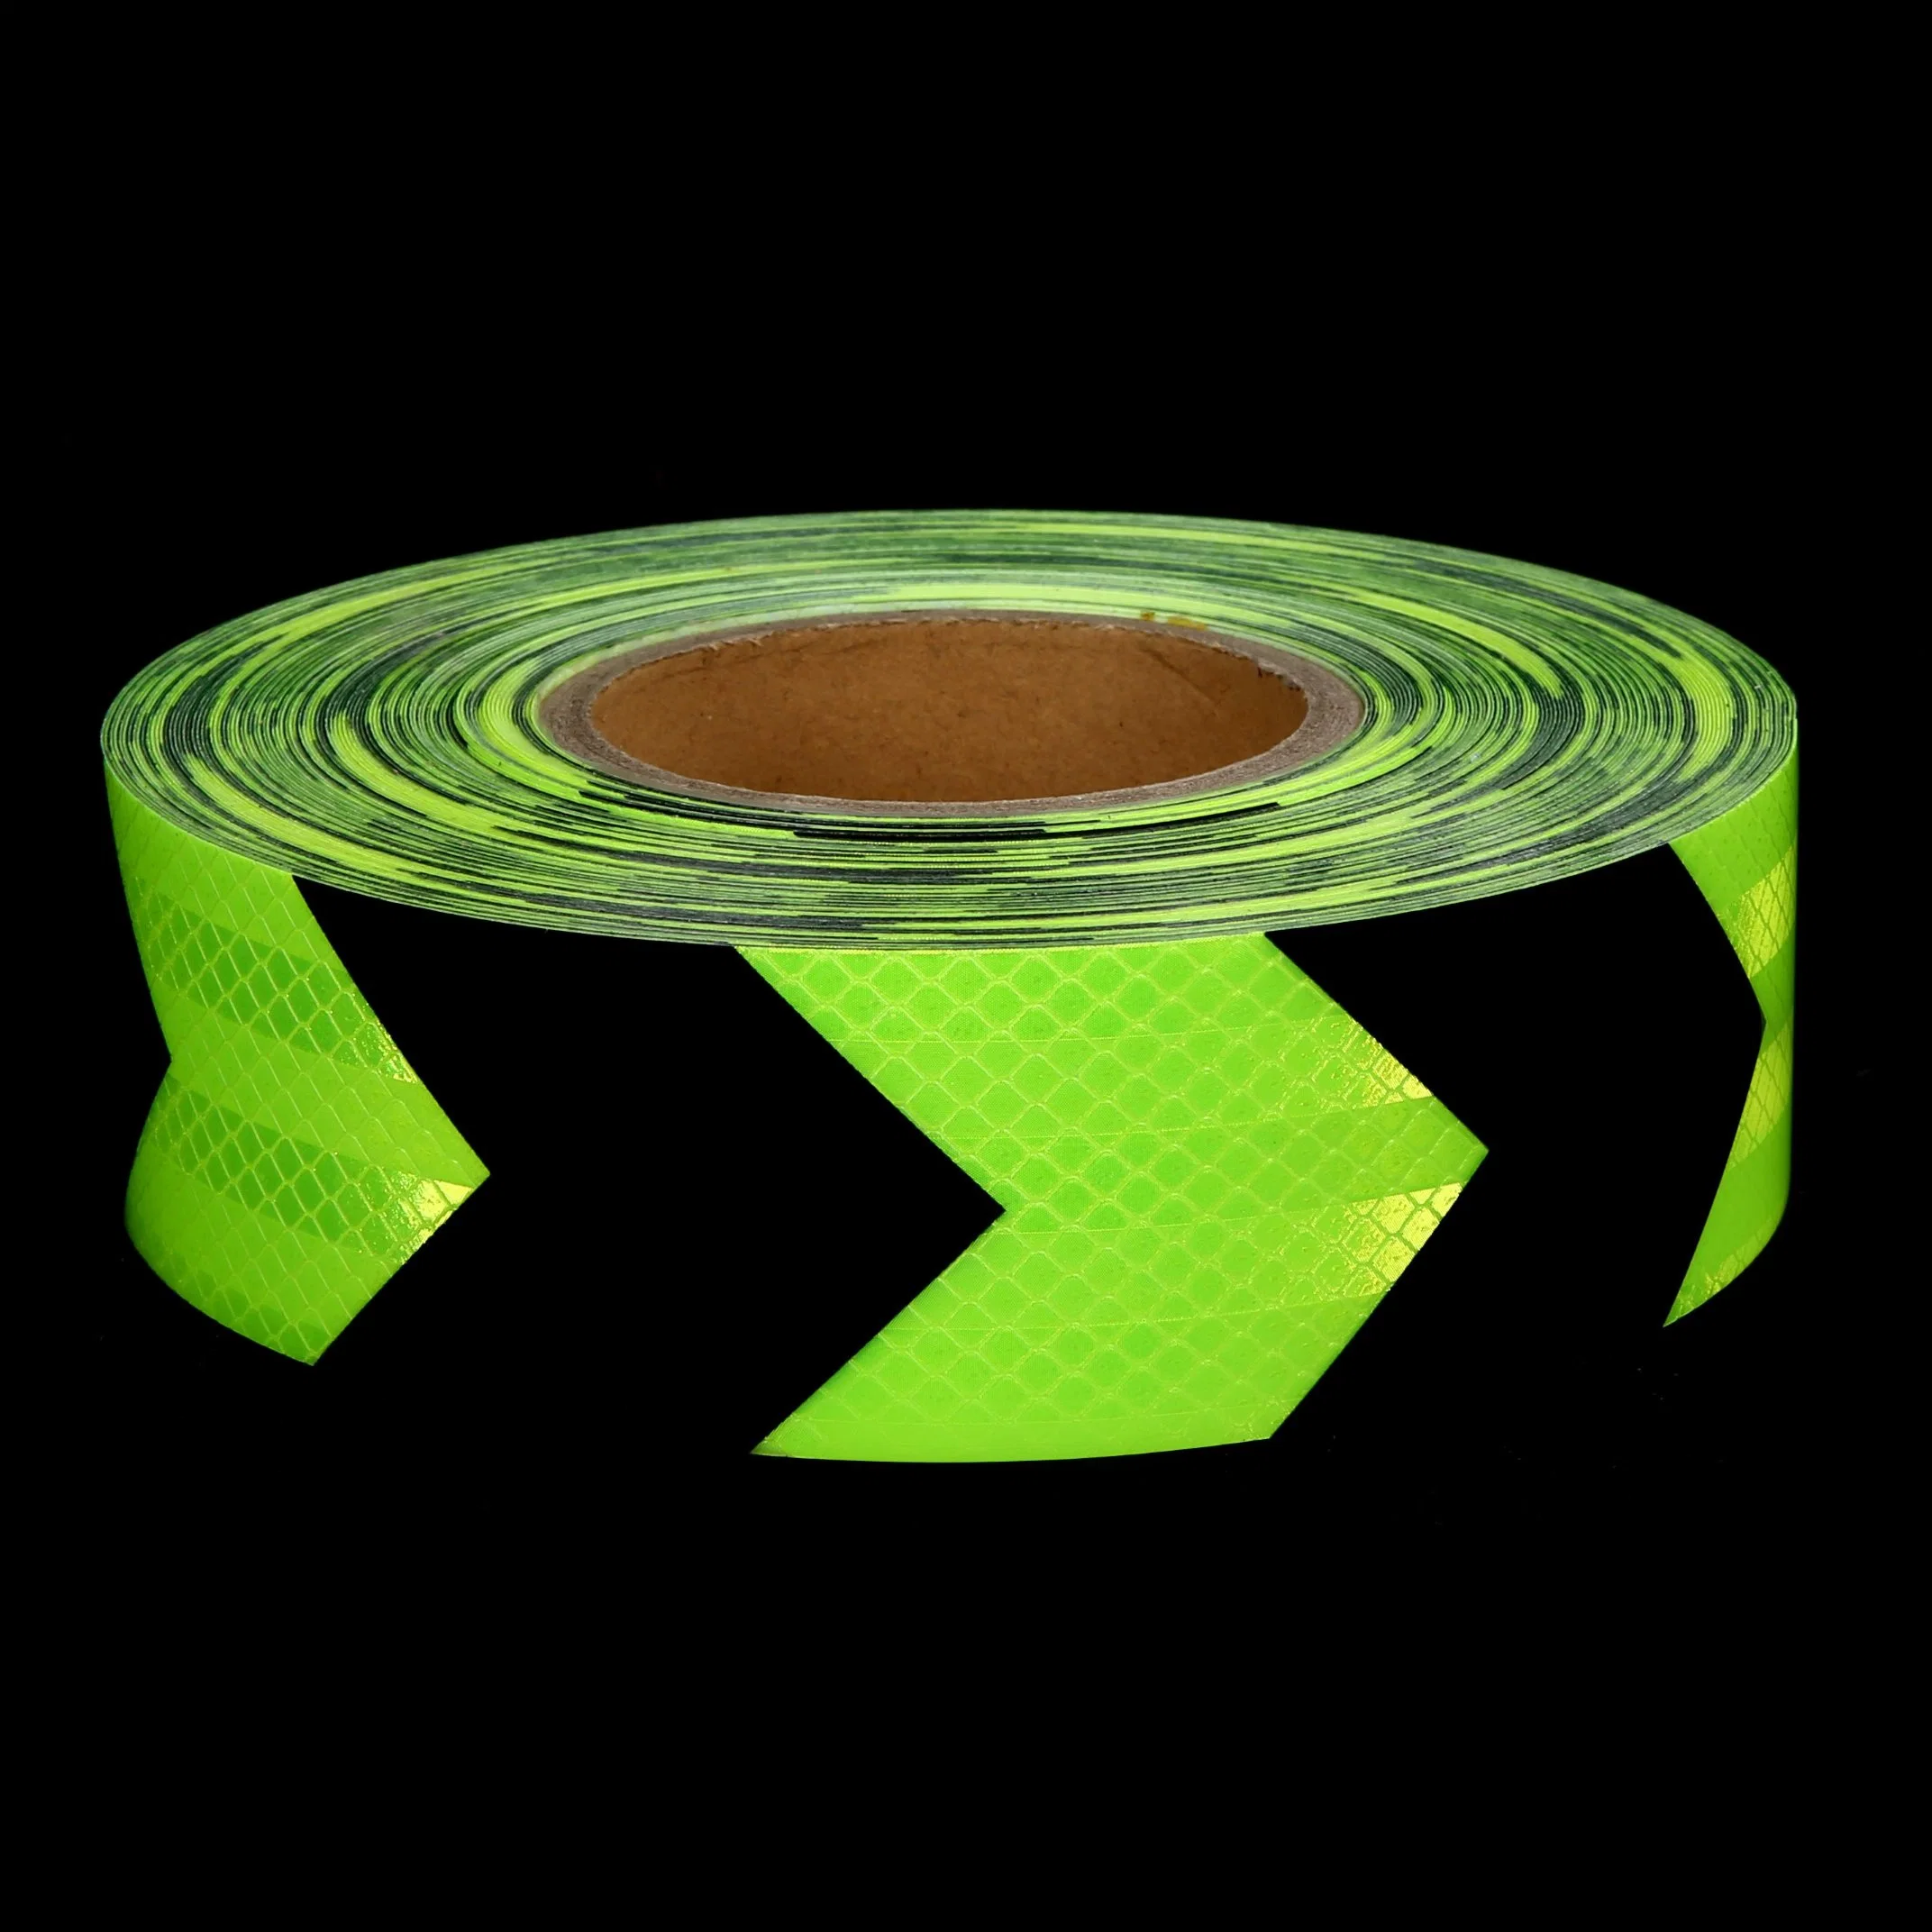 Black and Fluo Green Truck Arrow Reflective Safety Sticker Roll Pet Waterproof Outdoor Conspicuity Tape for Vehicles, Trailers, Boats, Signs